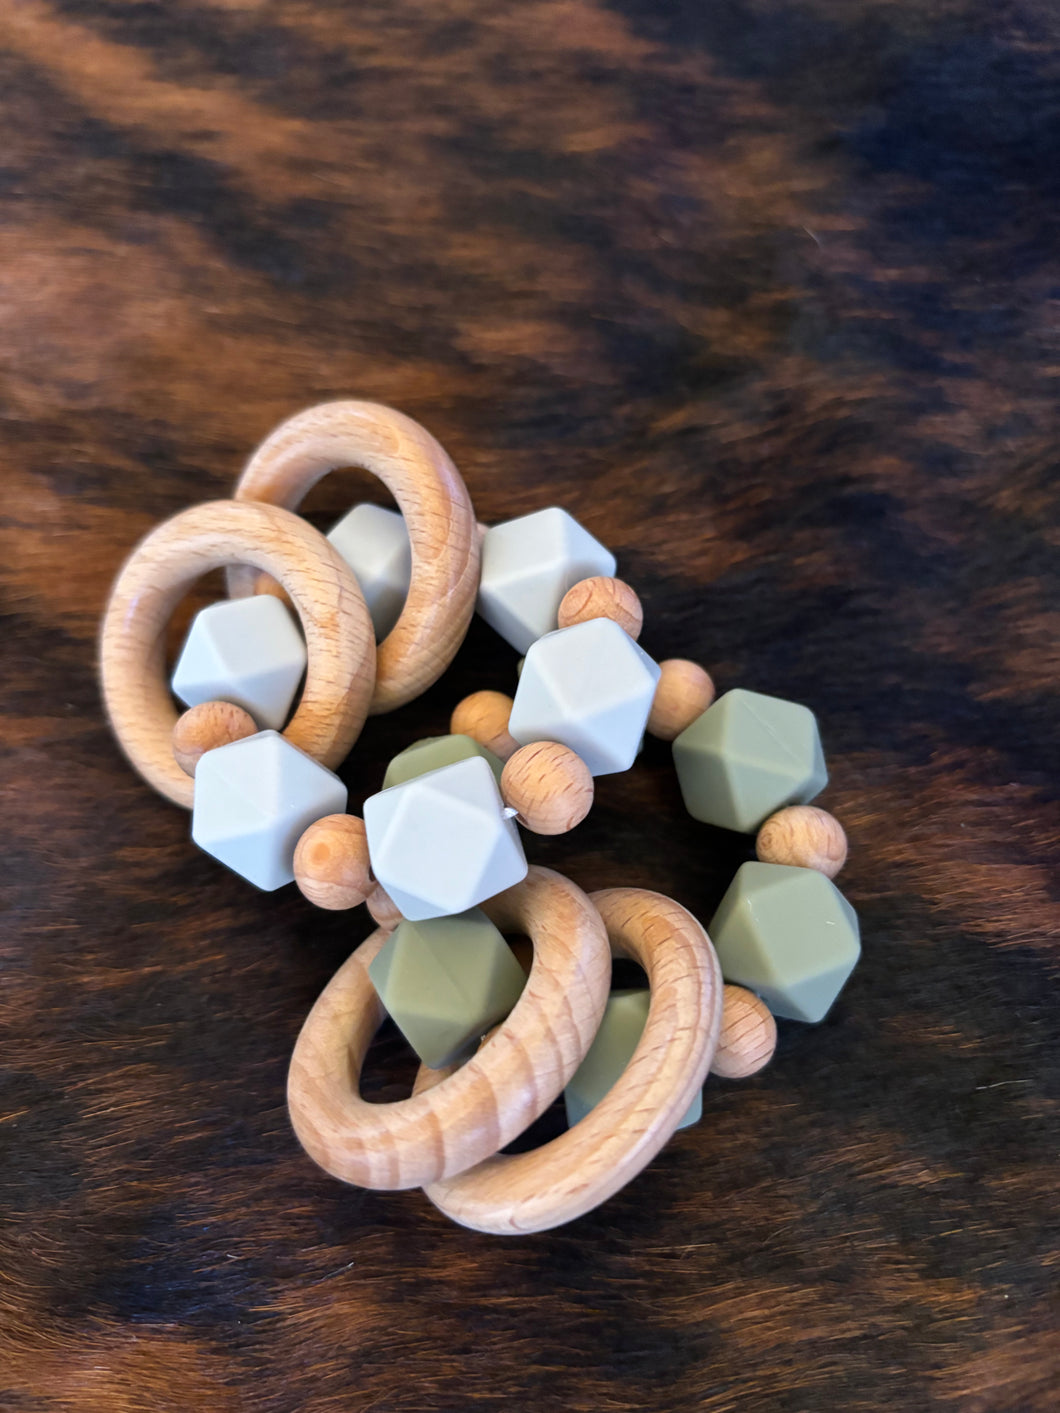 Silicon and Wooden Ring Teether